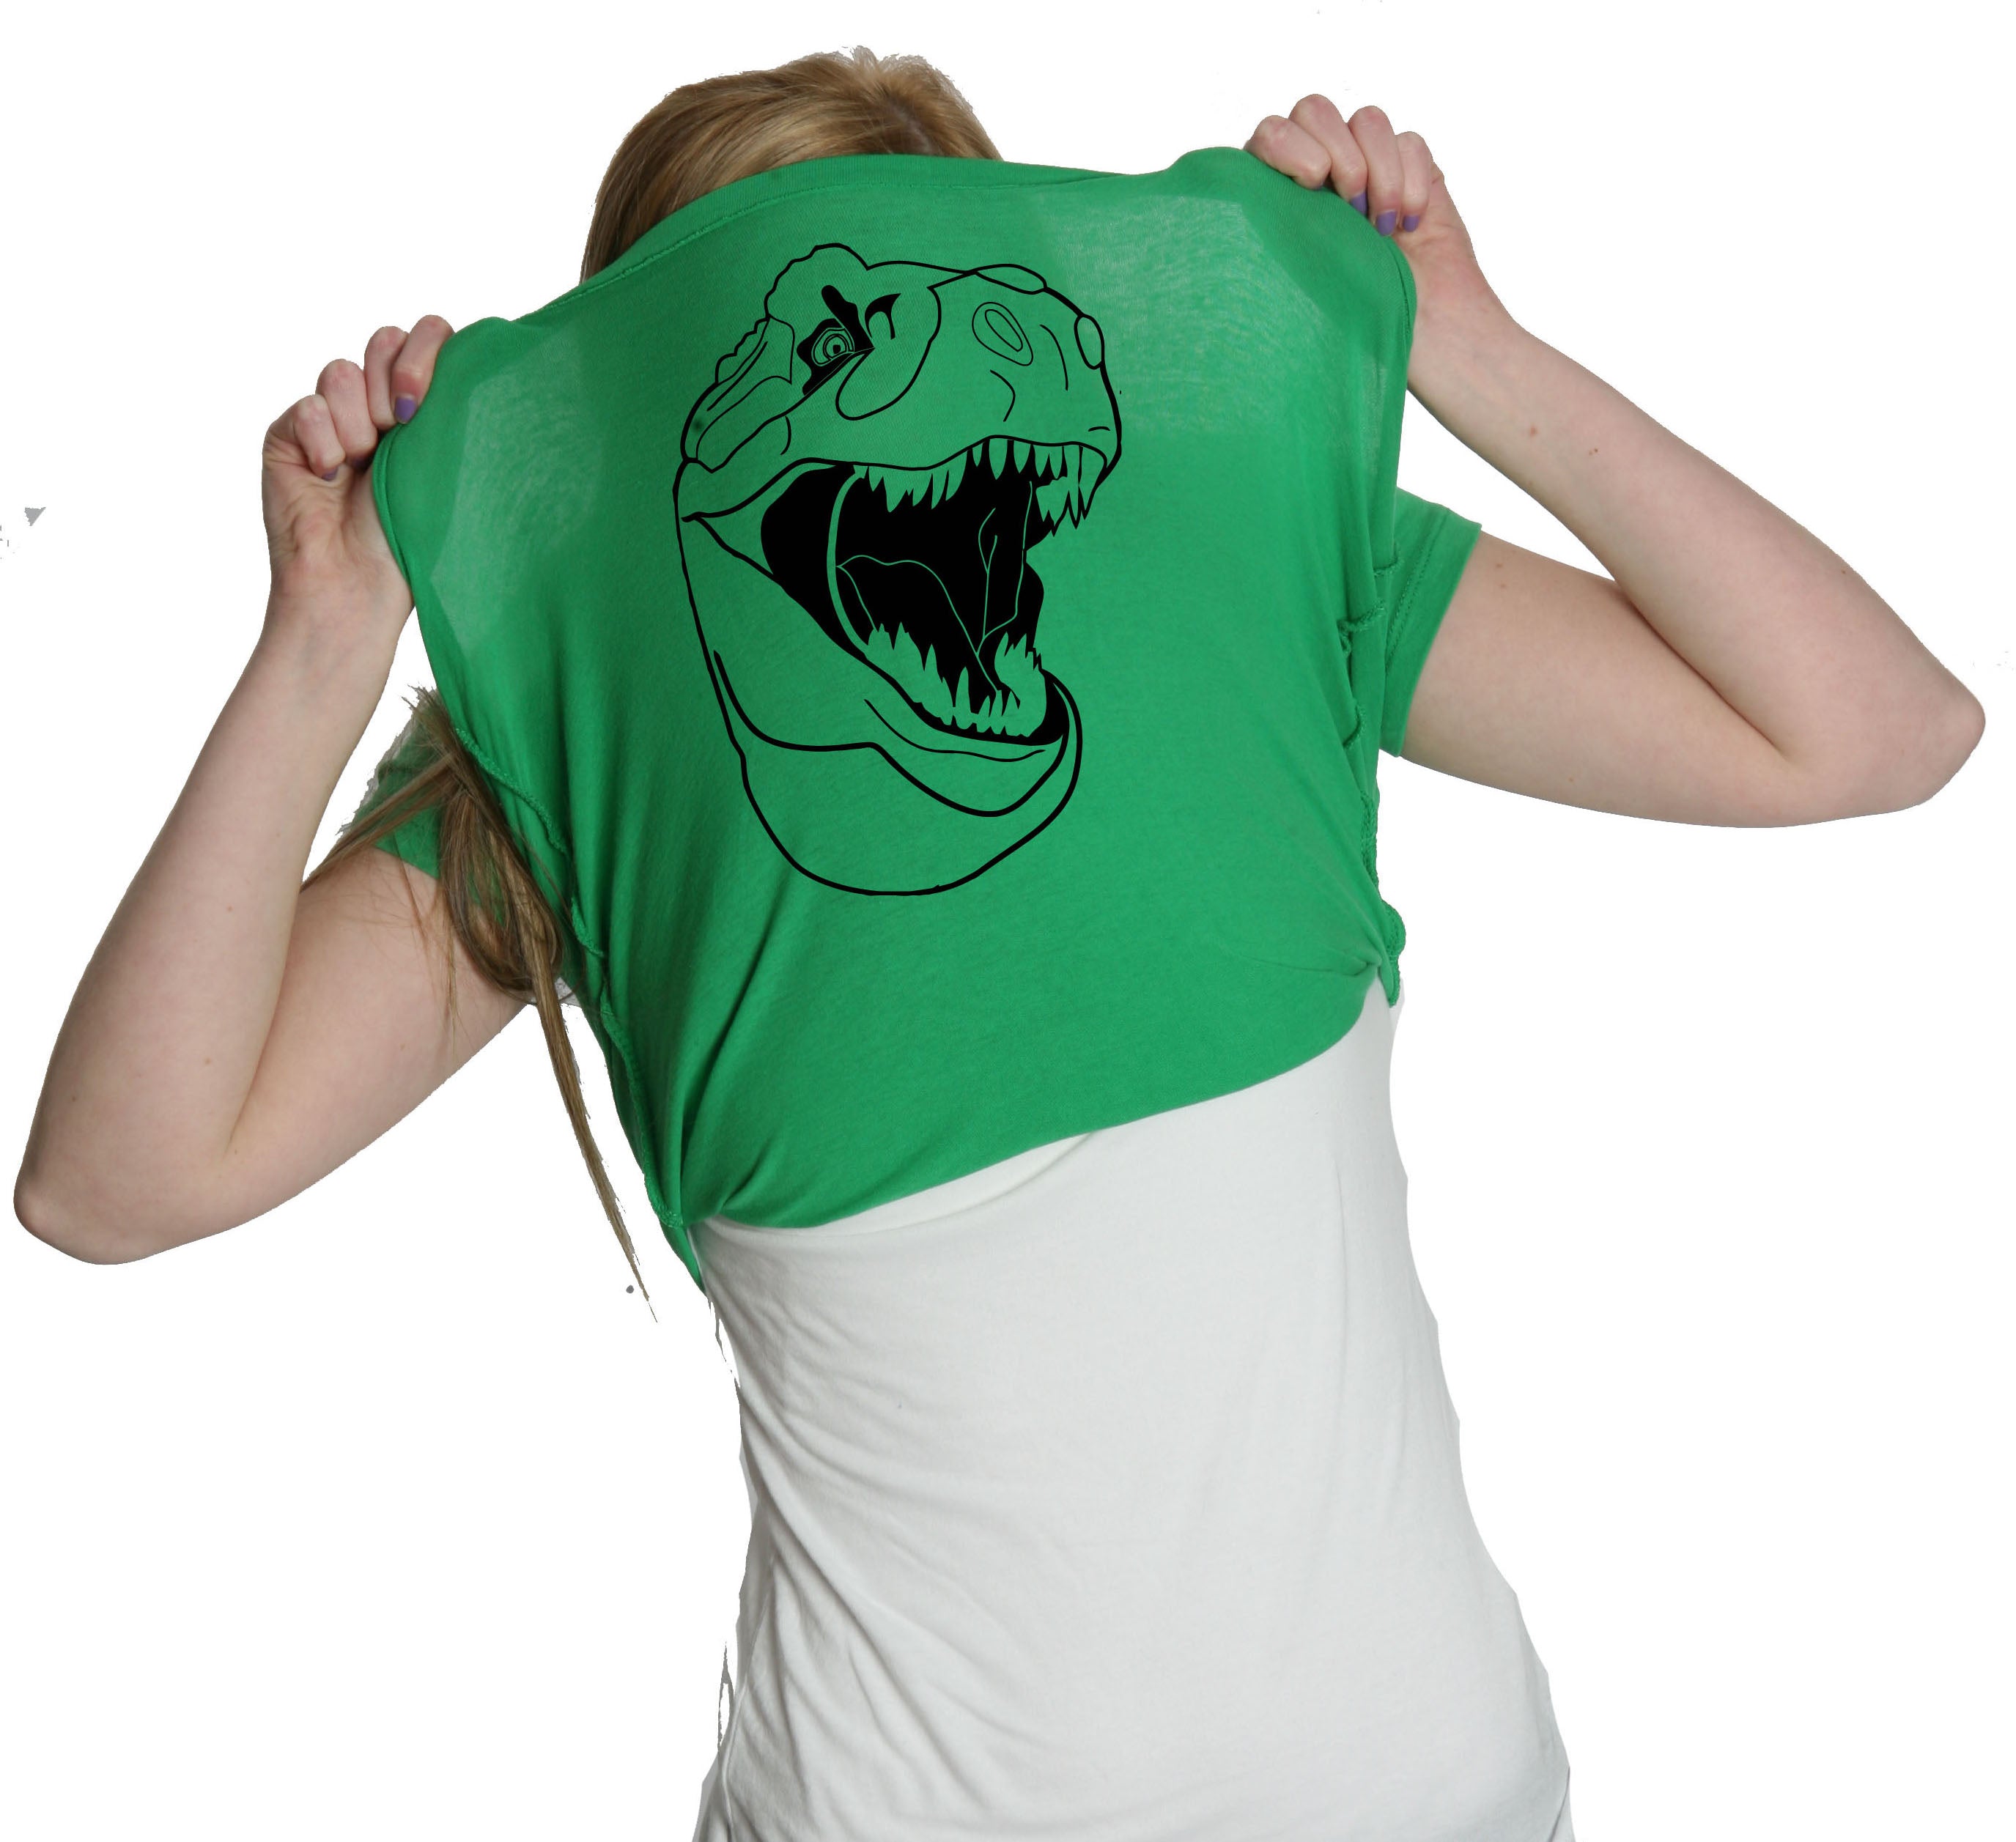 Ask Me About My Trex T shirt Funny Cool Dinosaur Flip N – Nerdy Shirts